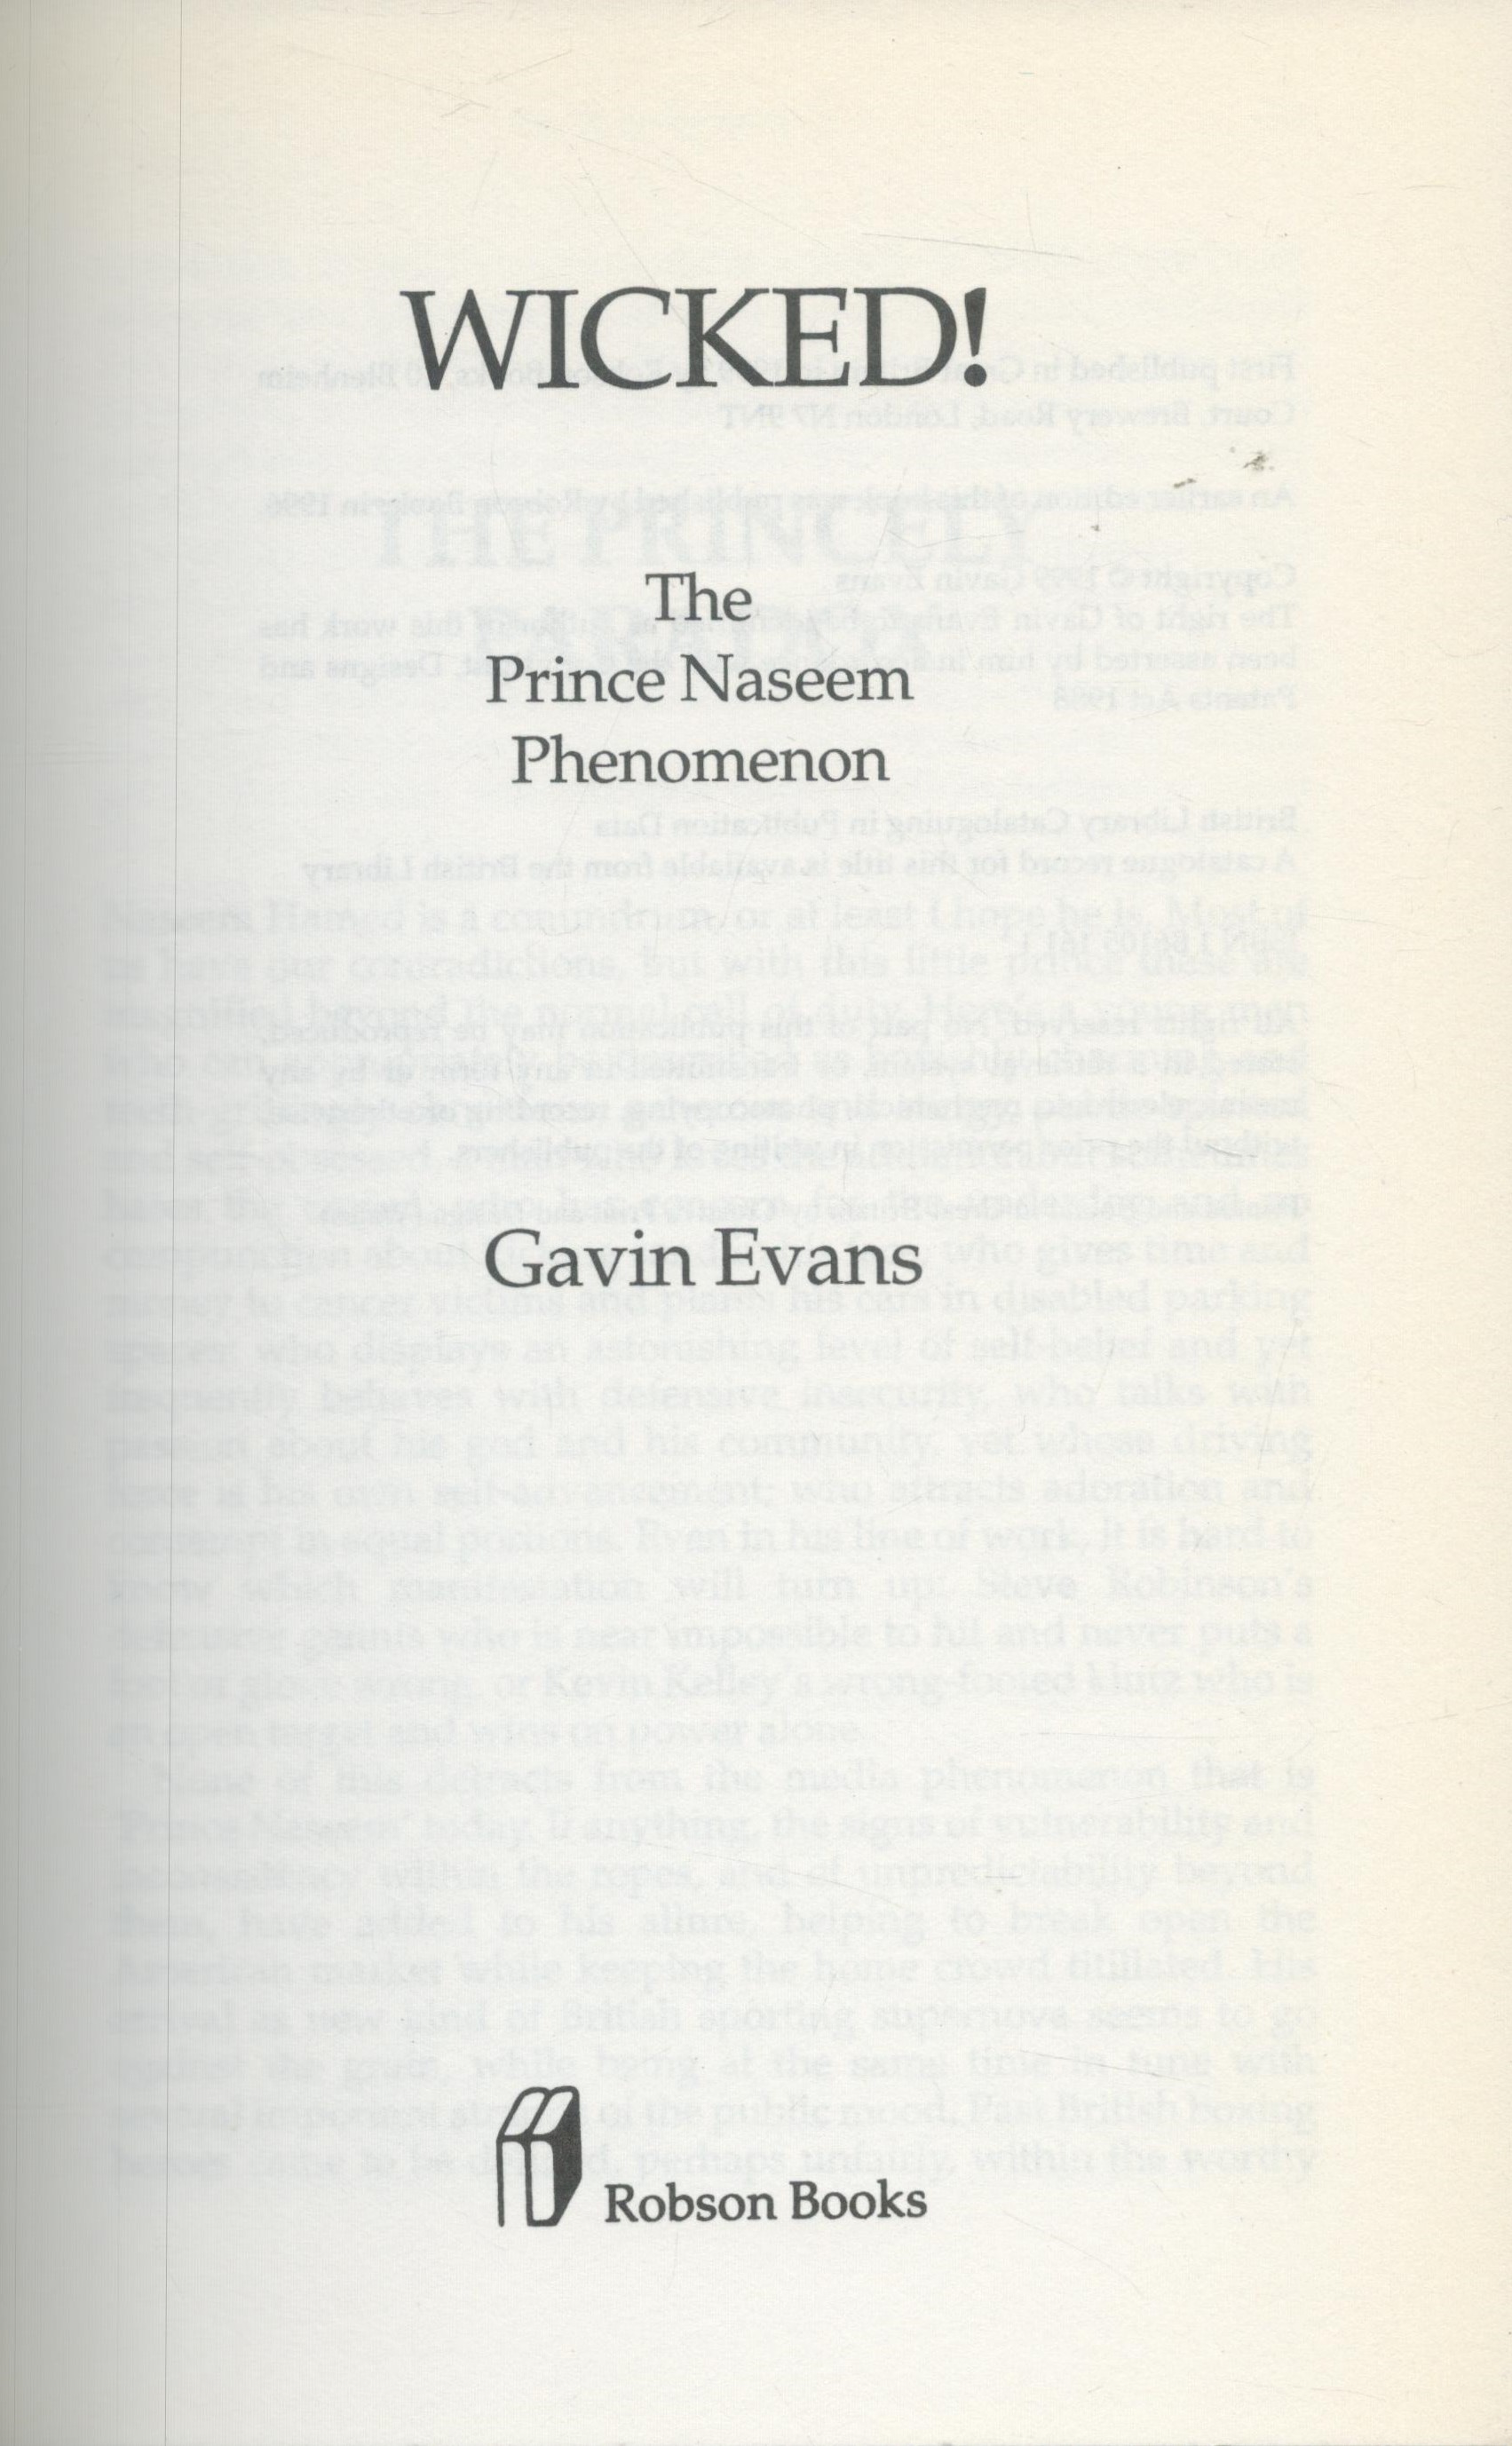 Wicked! The Prince Naseem Phenomenon Gavin Evans Paperback book, 313 pages. Good Condition. All - Image 2 of 3